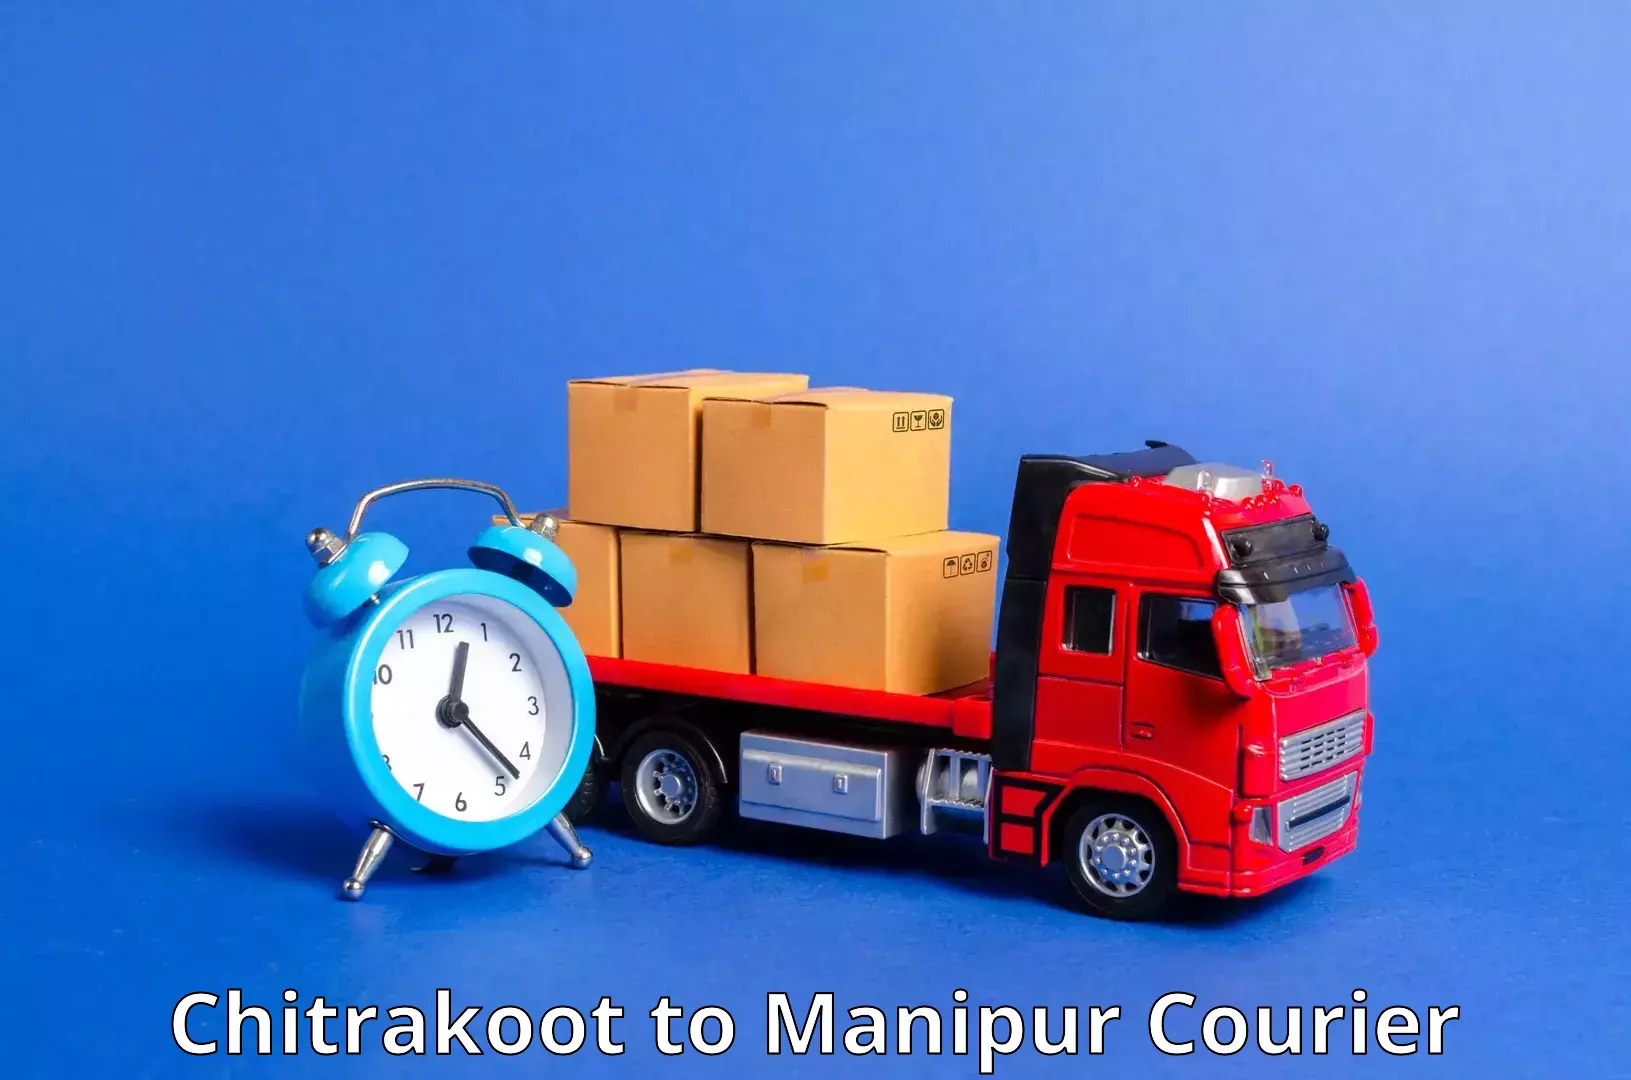 User-friendly delivery service Chitrakoot to Manipur